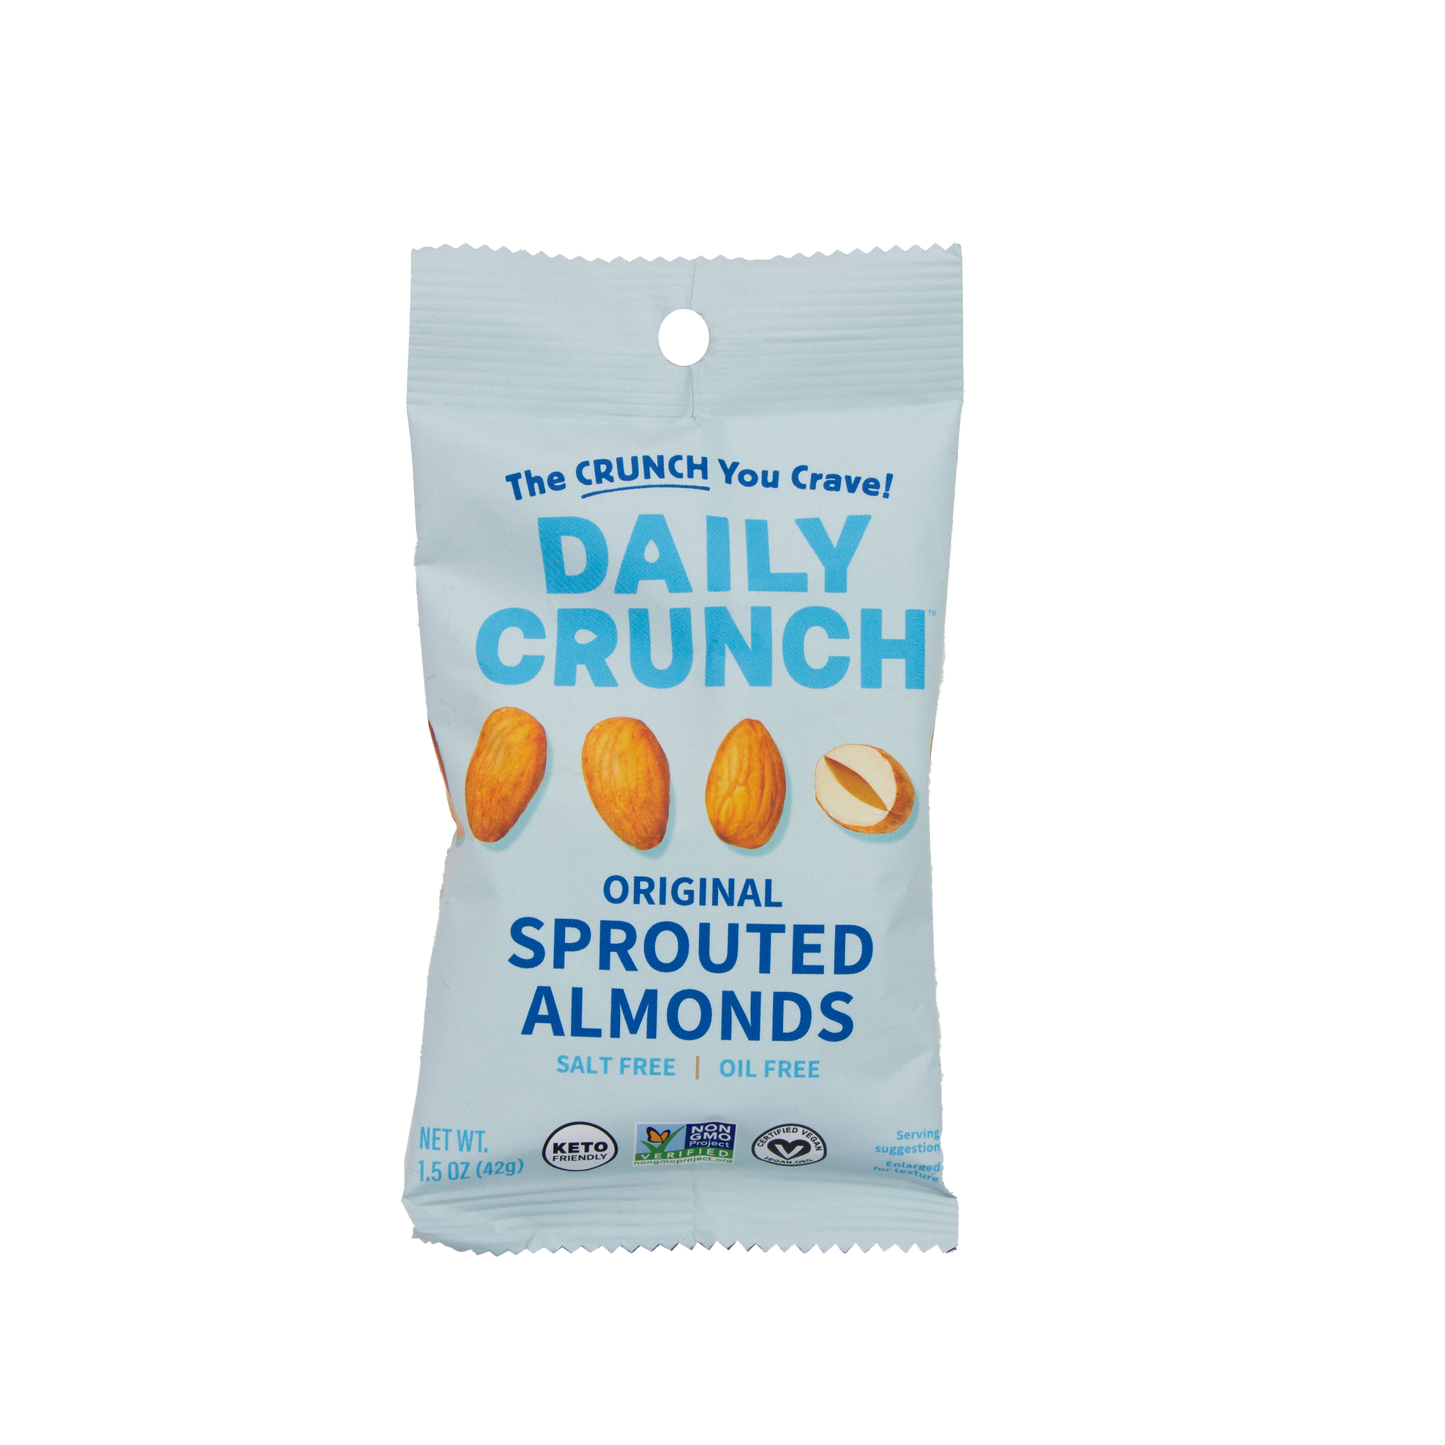 Daily Crunch - Original Sprouted Almonds